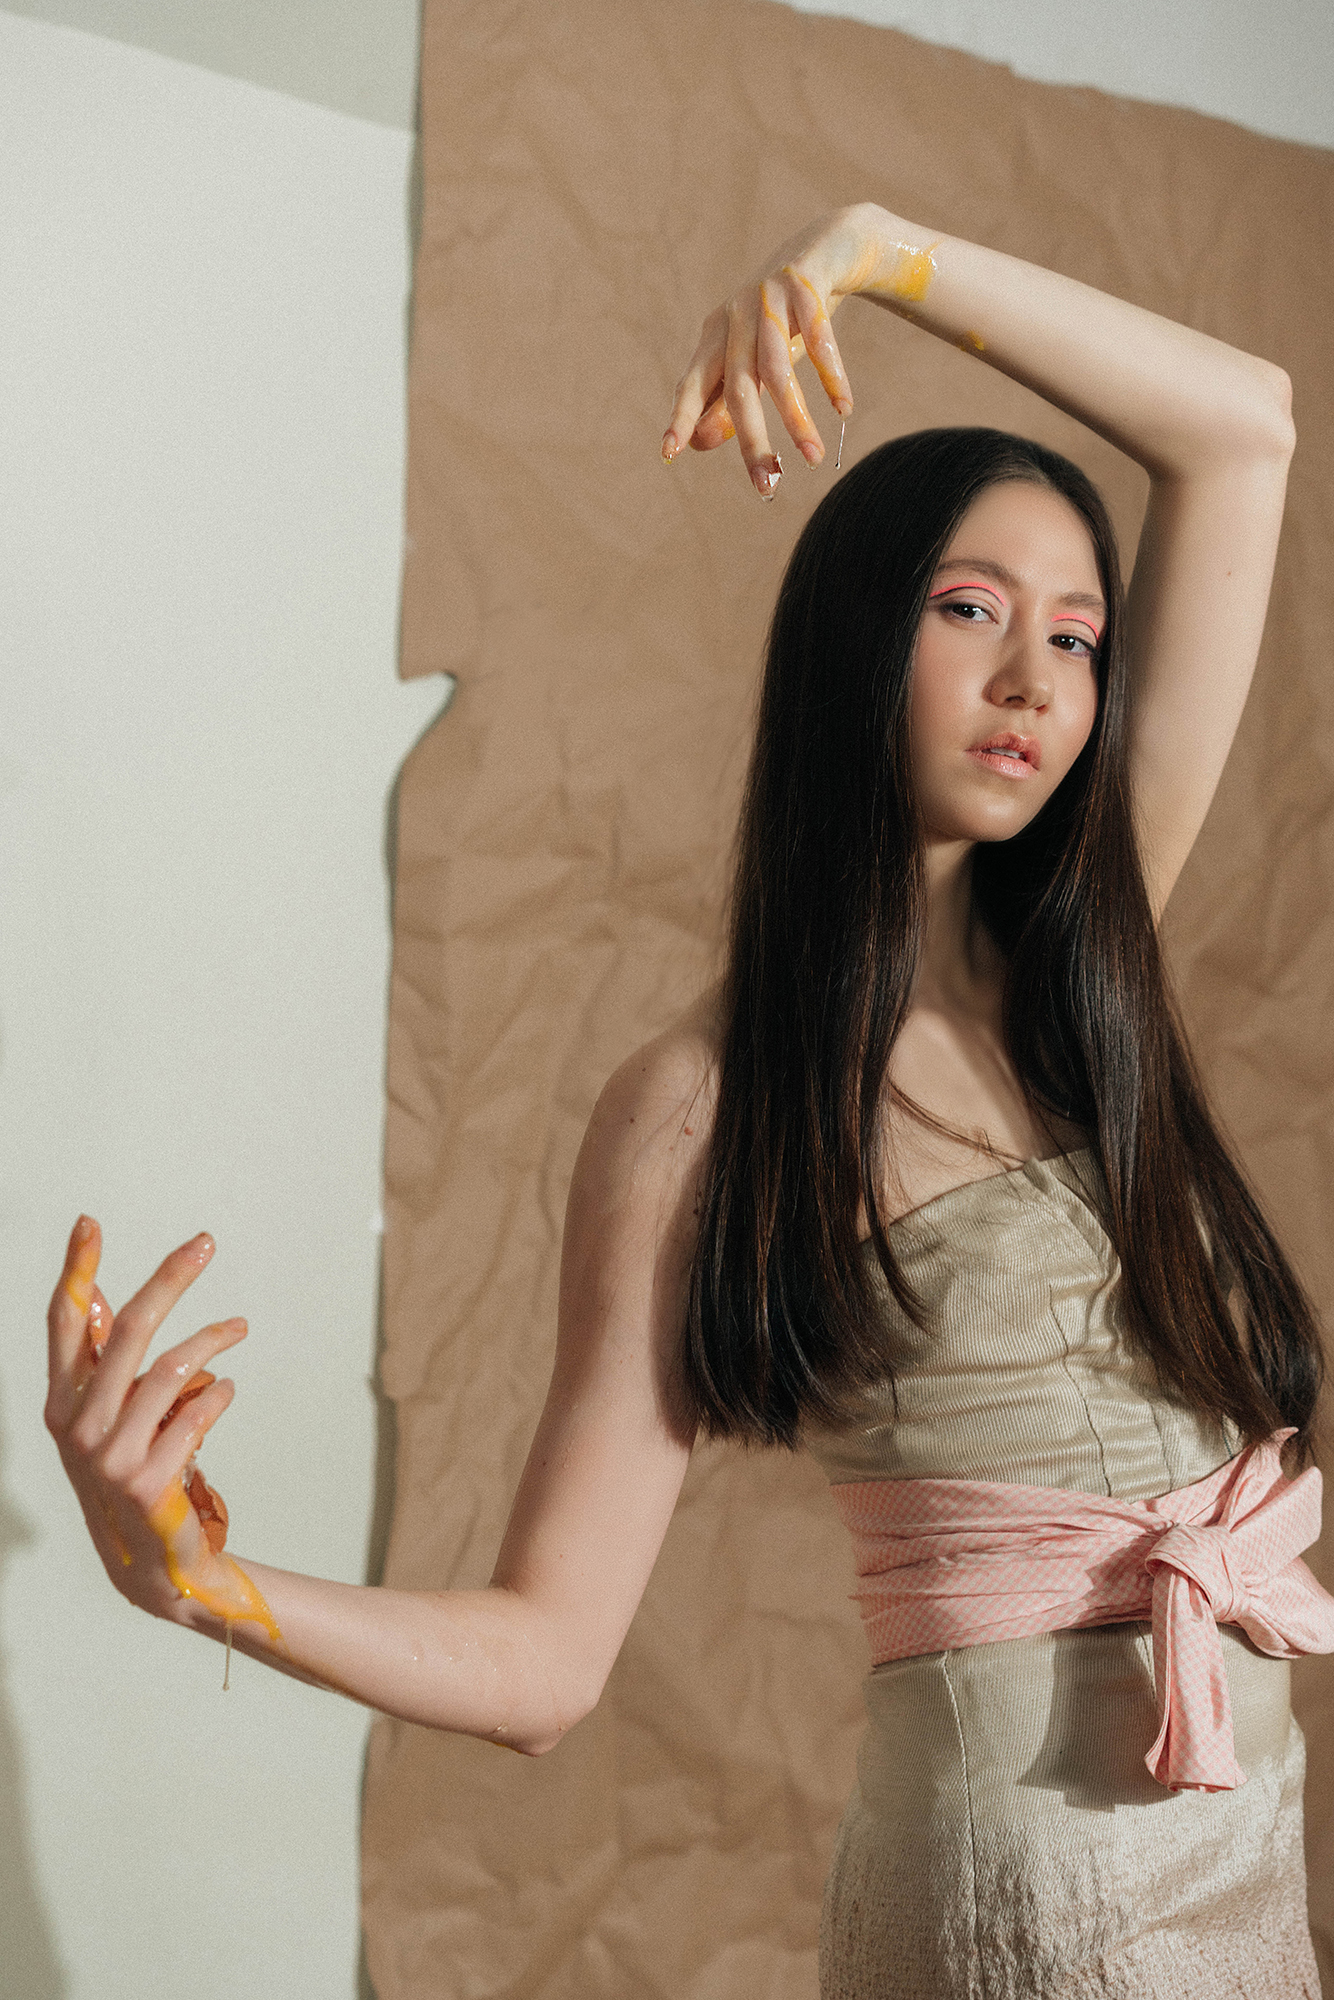 Wallflower - Editorial by Stacie Yue